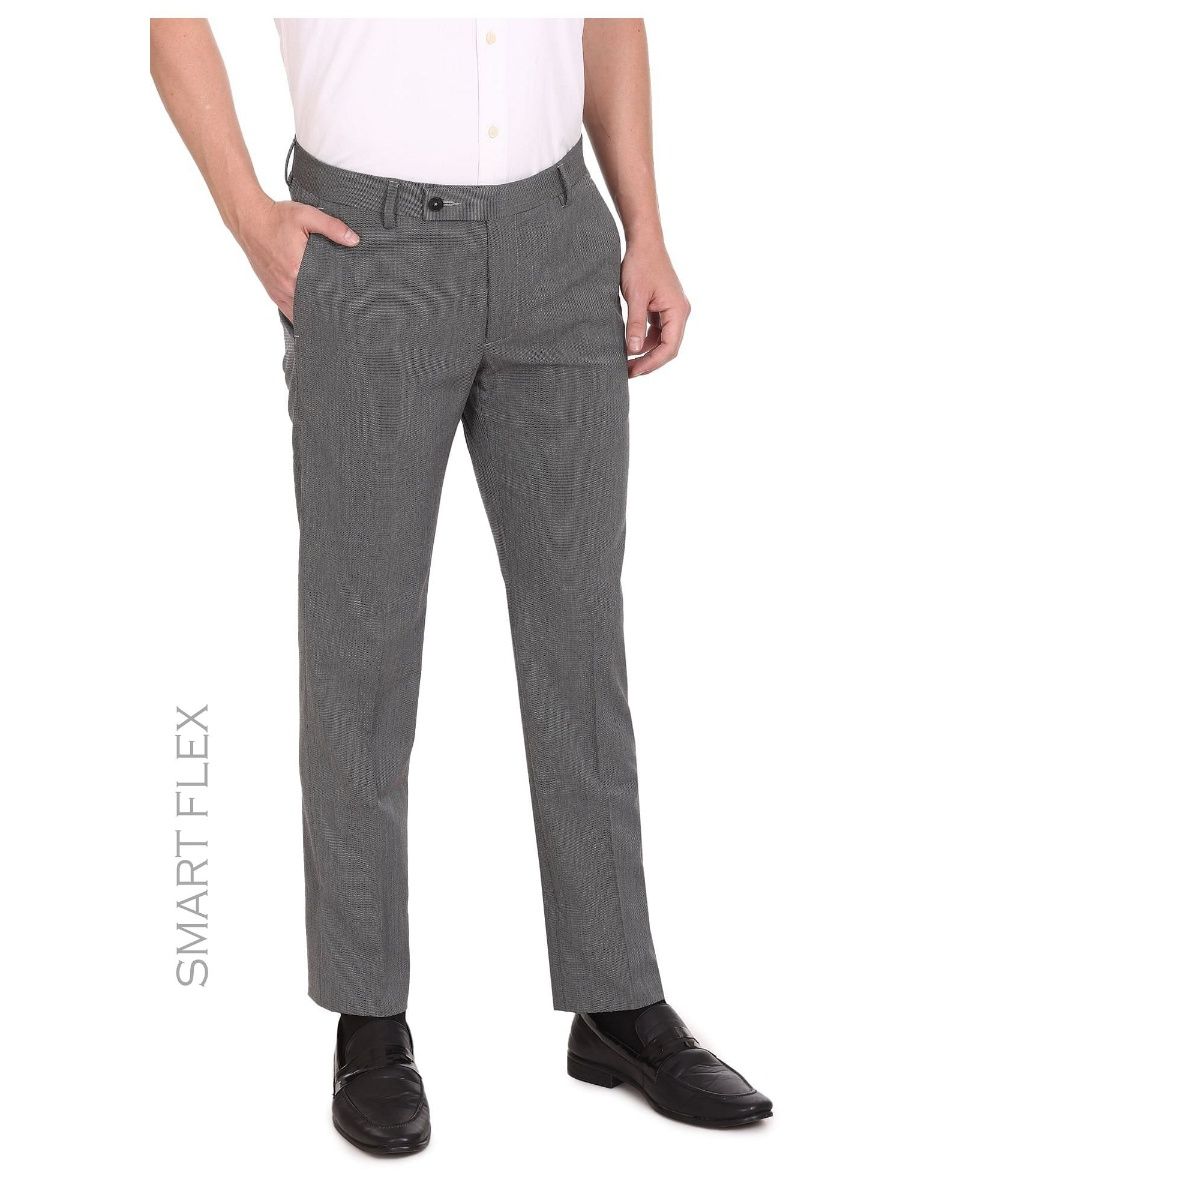 Men's Flat Front Smart Formal Pants Office Supercrease Tailored Fit Trousers  | eBay